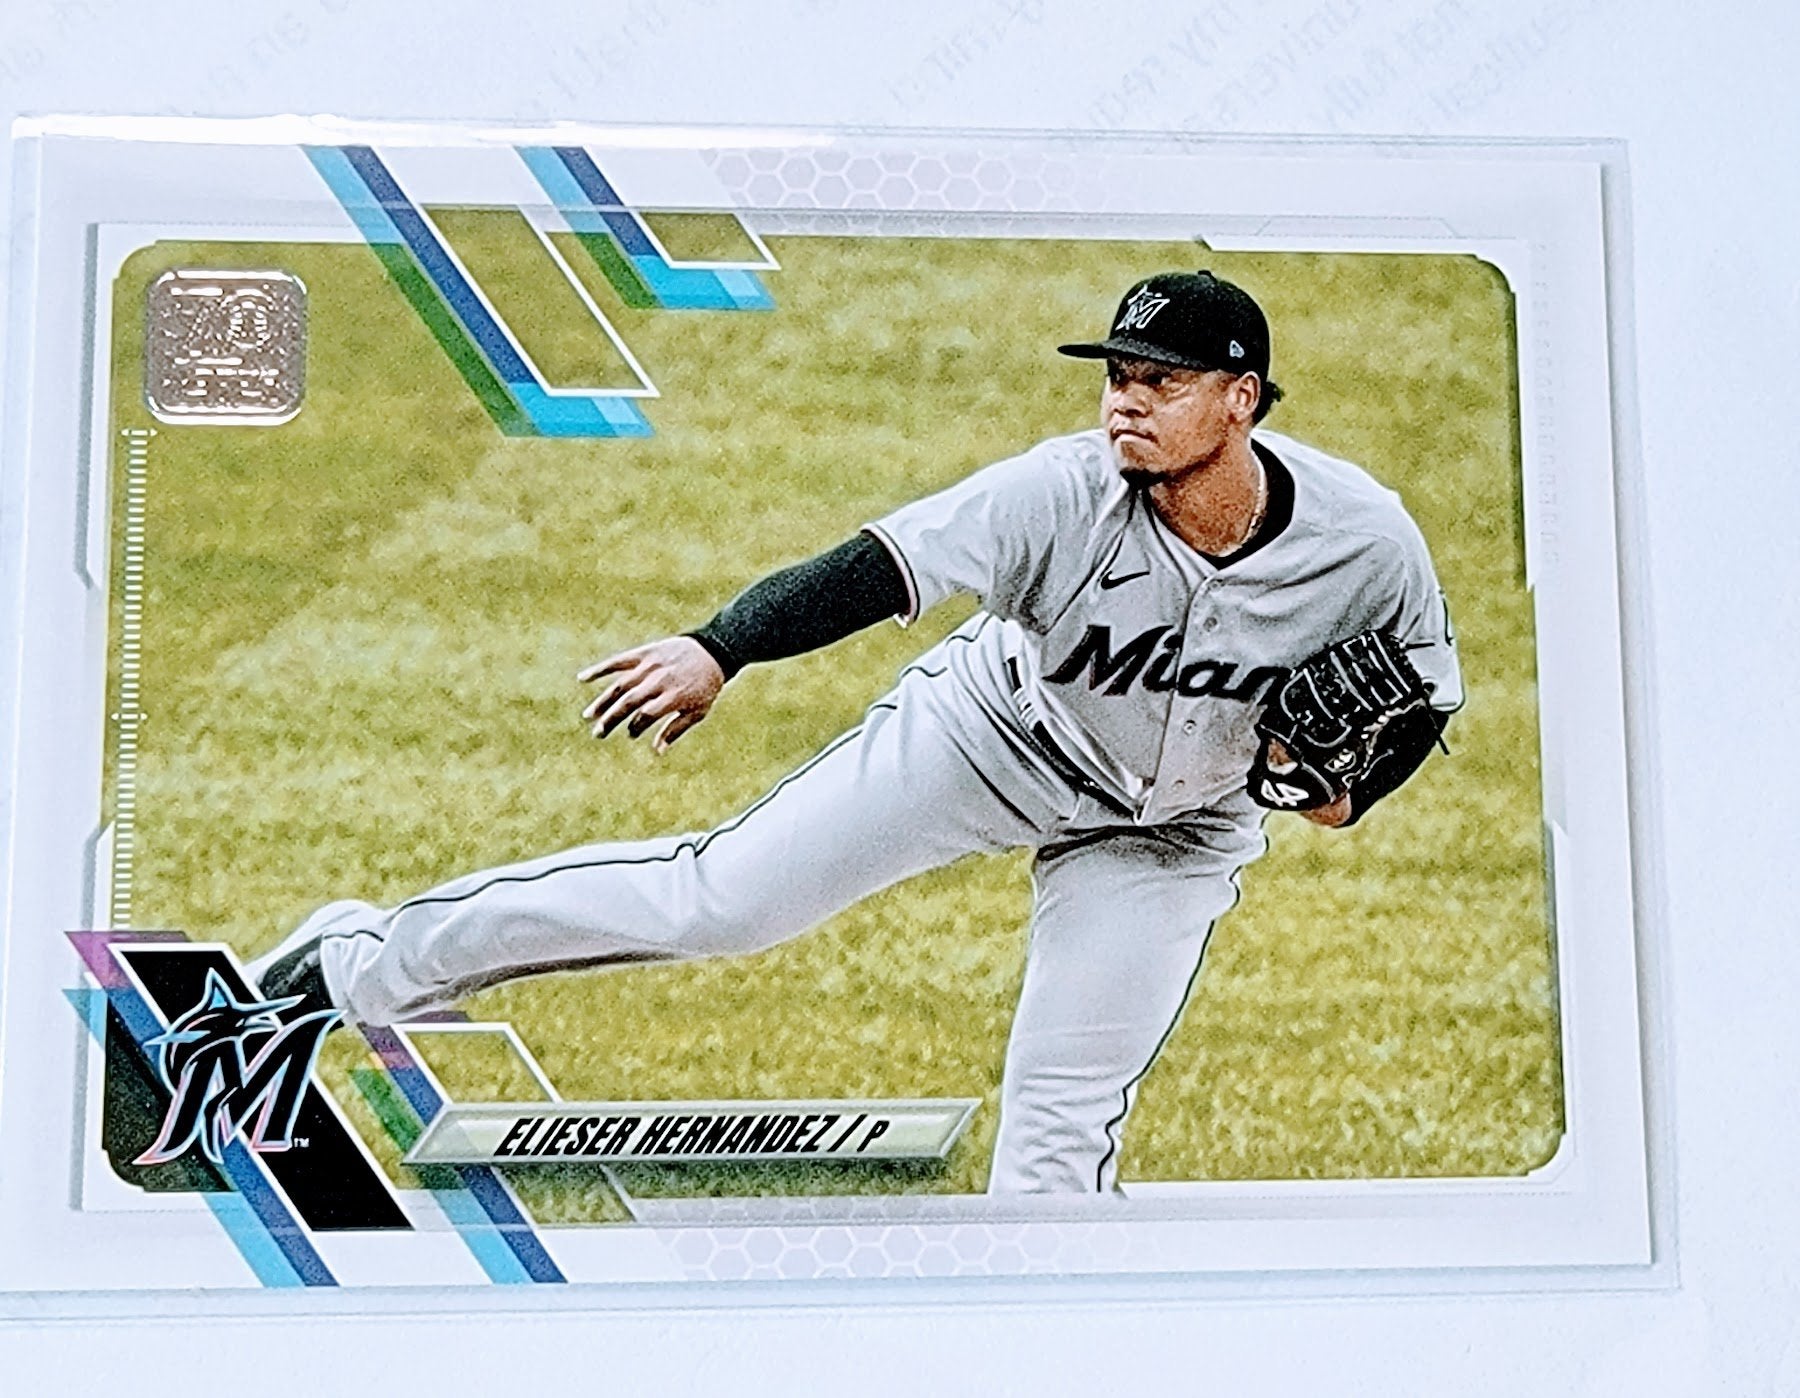 2021 Topps Update Elieser Hernandez Baseball Trading Card SMCB1 simple Xclusive Collectibles   